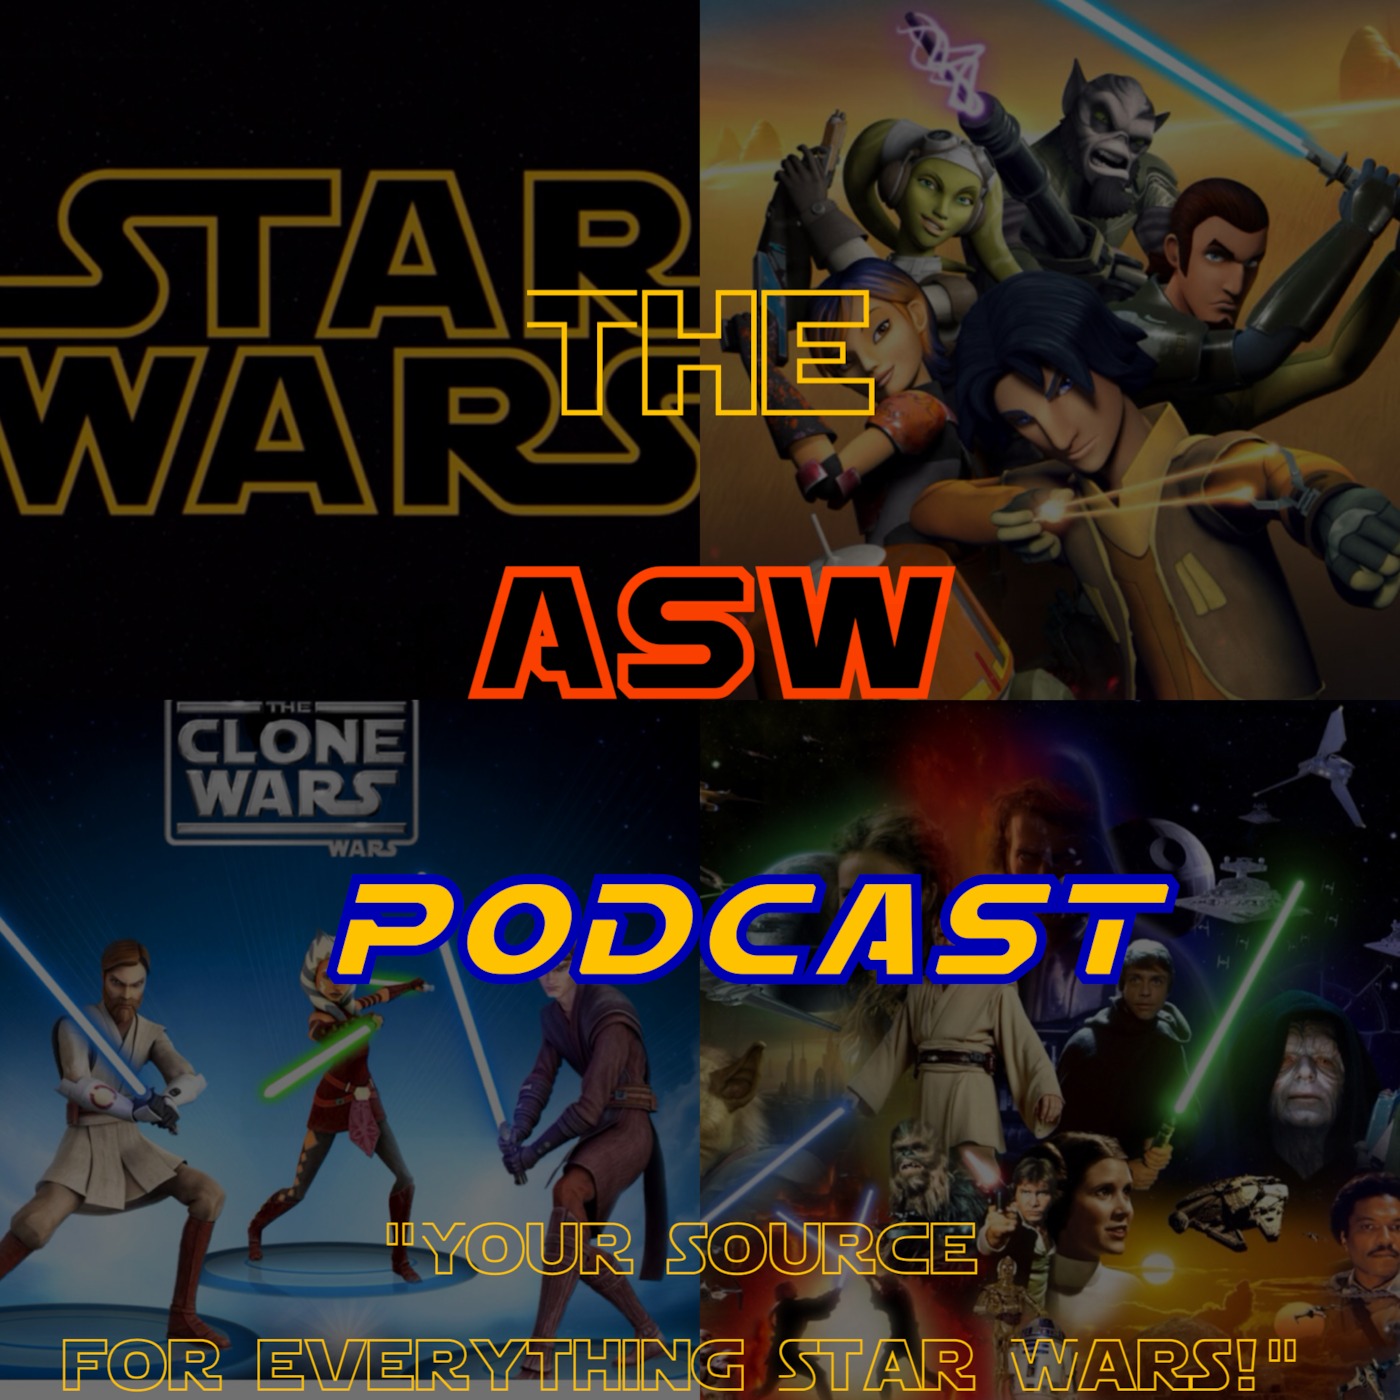 All_Star Wars Podcast